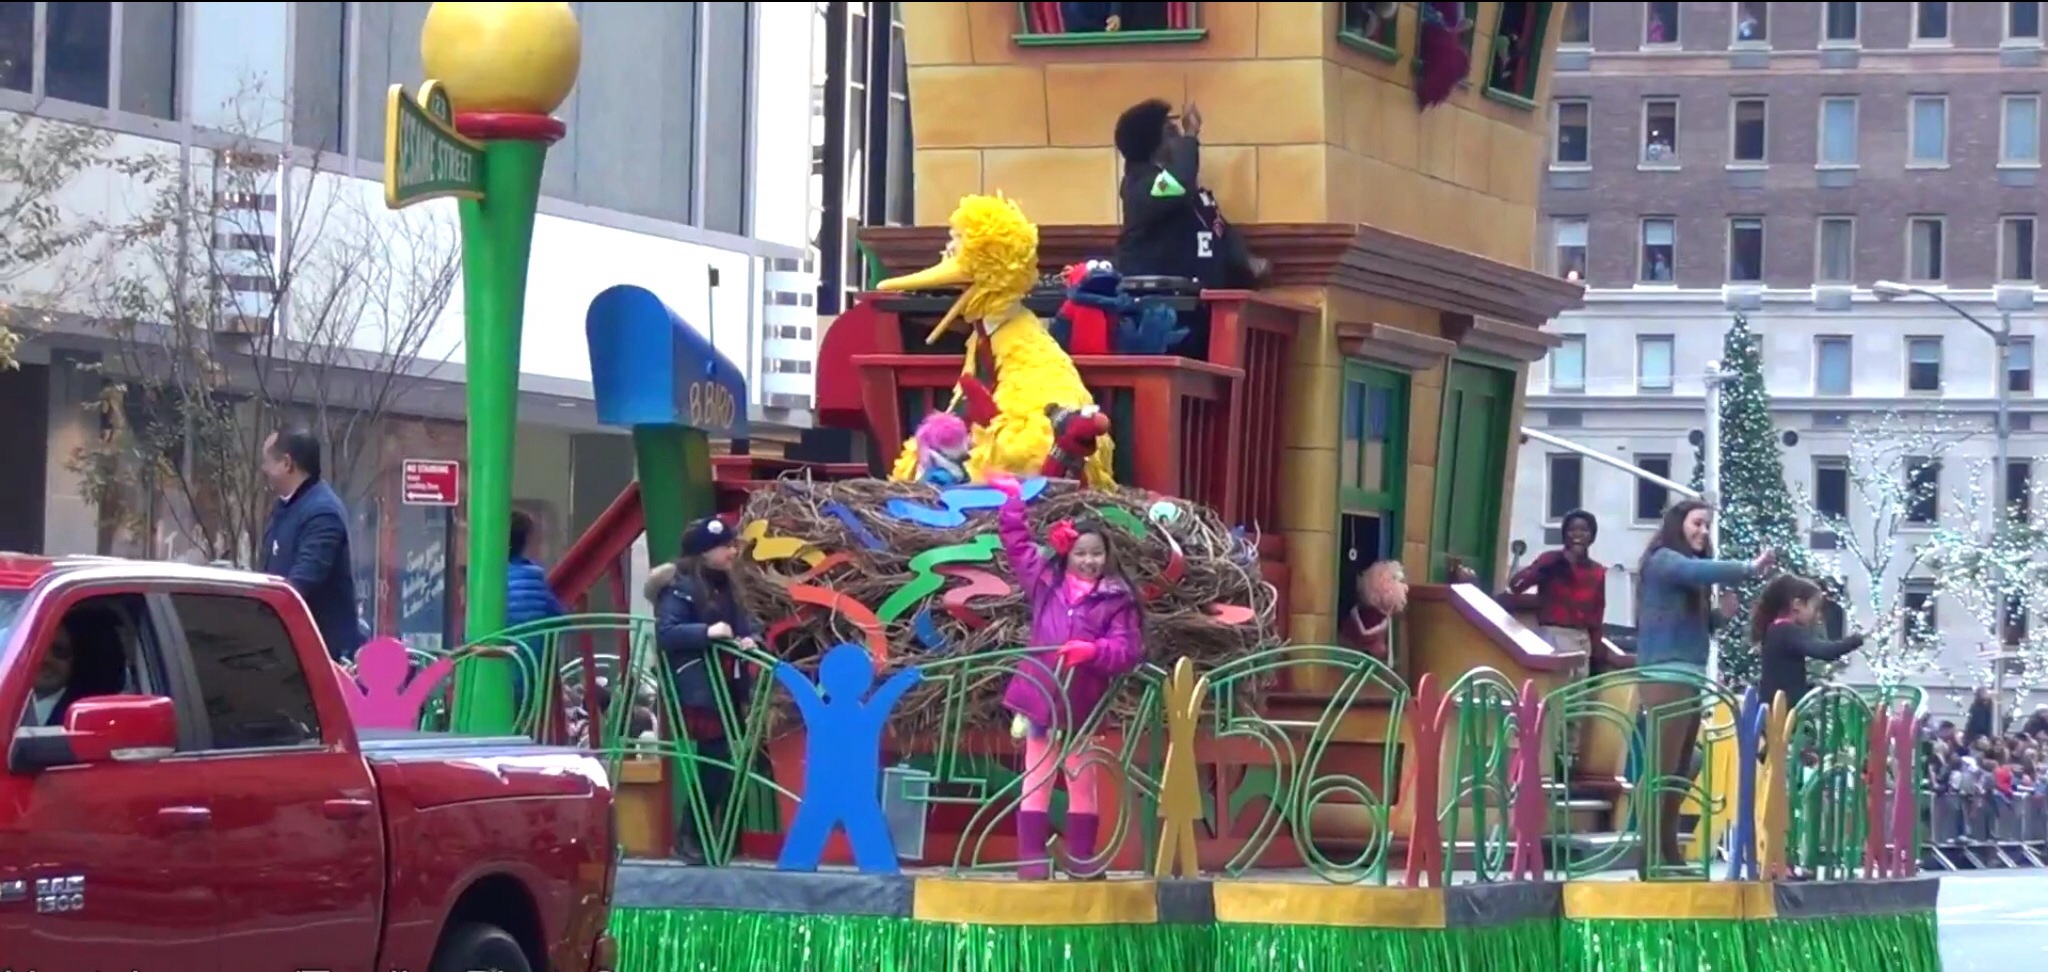 RAINA CHENG on the Sesame Street Float waves to spectators at the 89th Macy's Thanksgiving Day Parade, 11/26/2015